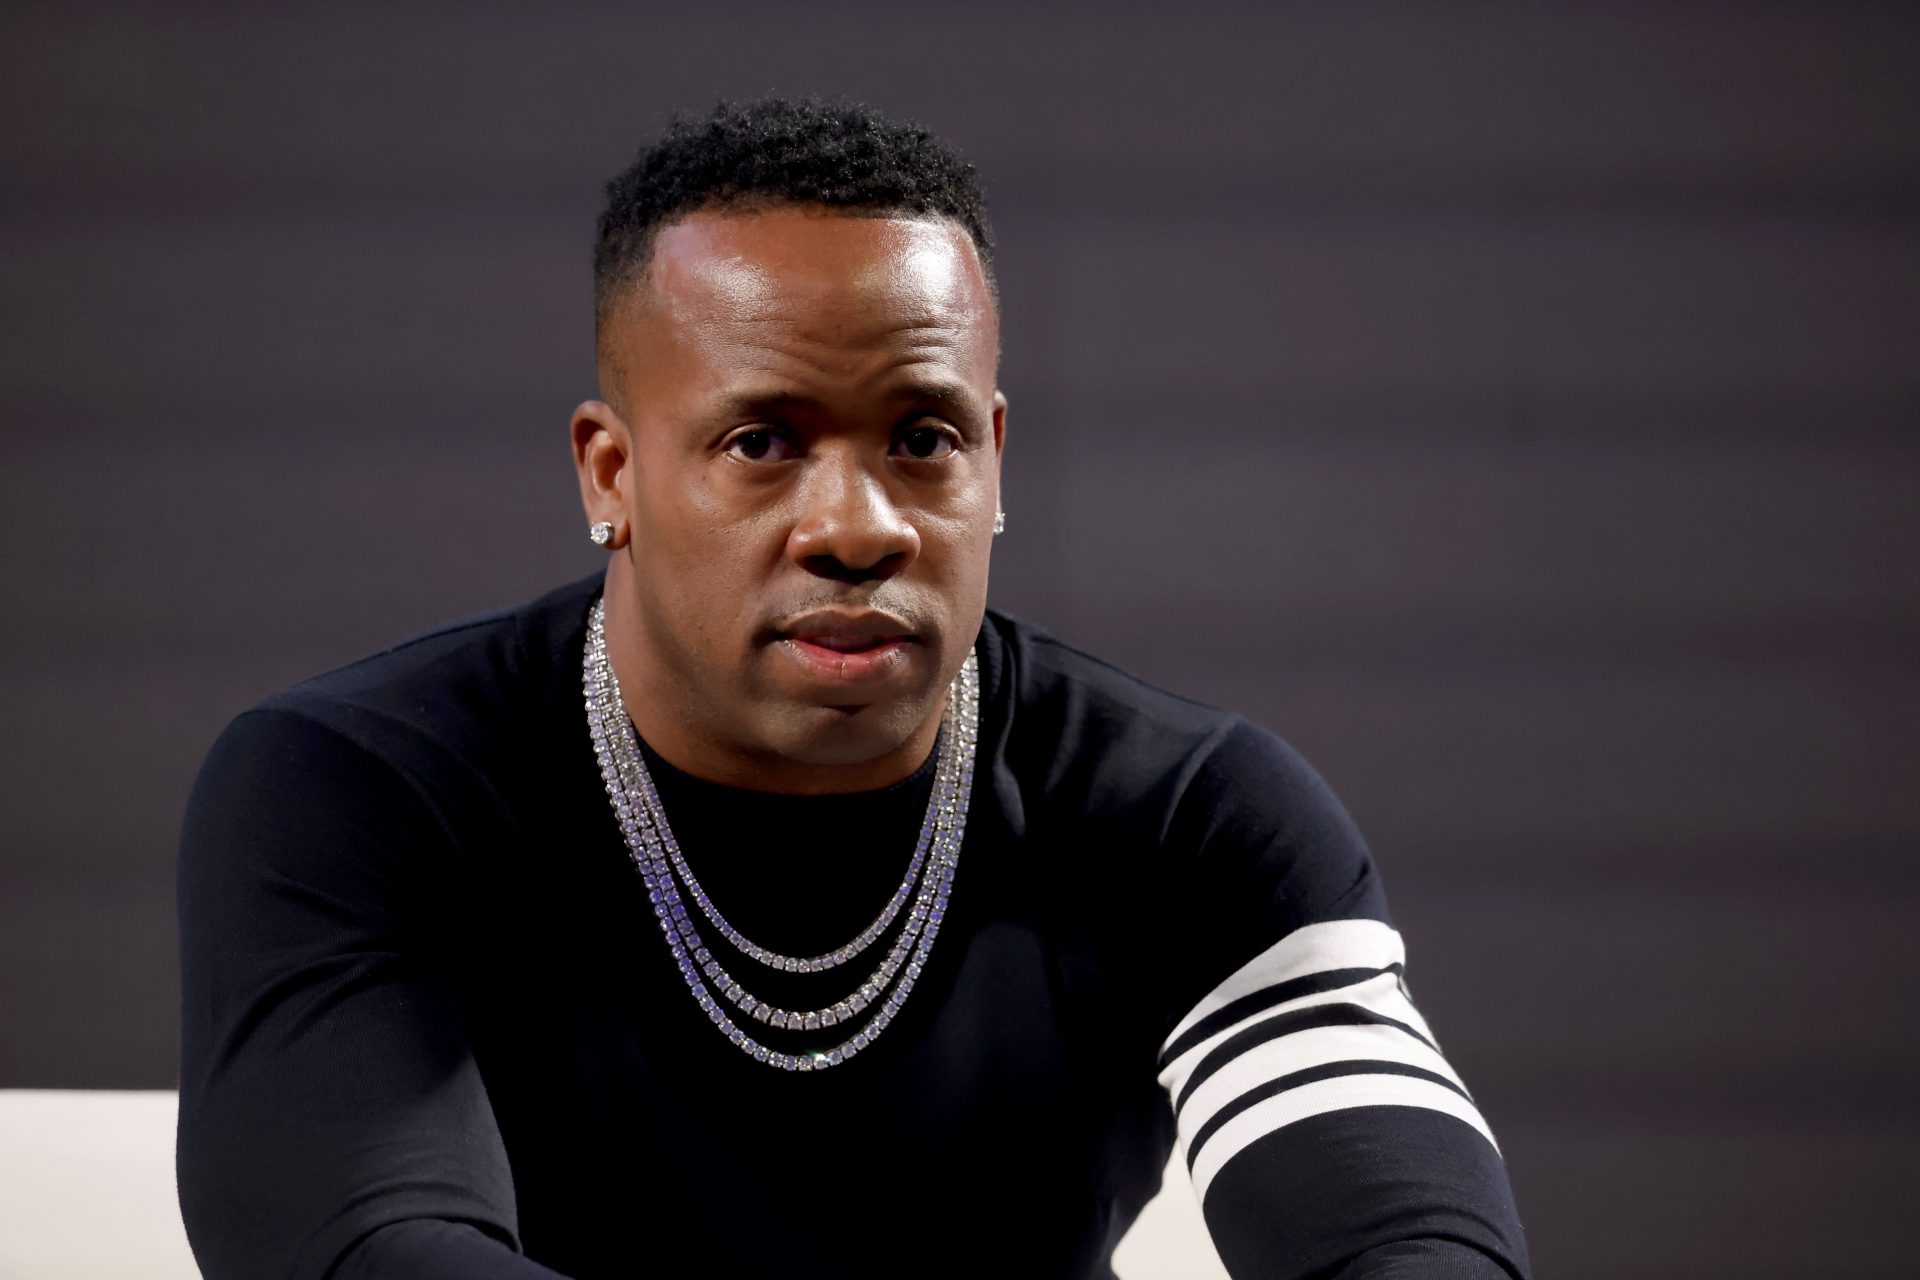 Exclusive Photos: Yo Gotti Gifts Himself Two Rolls Royce Cars For $1.2M On His Birthday